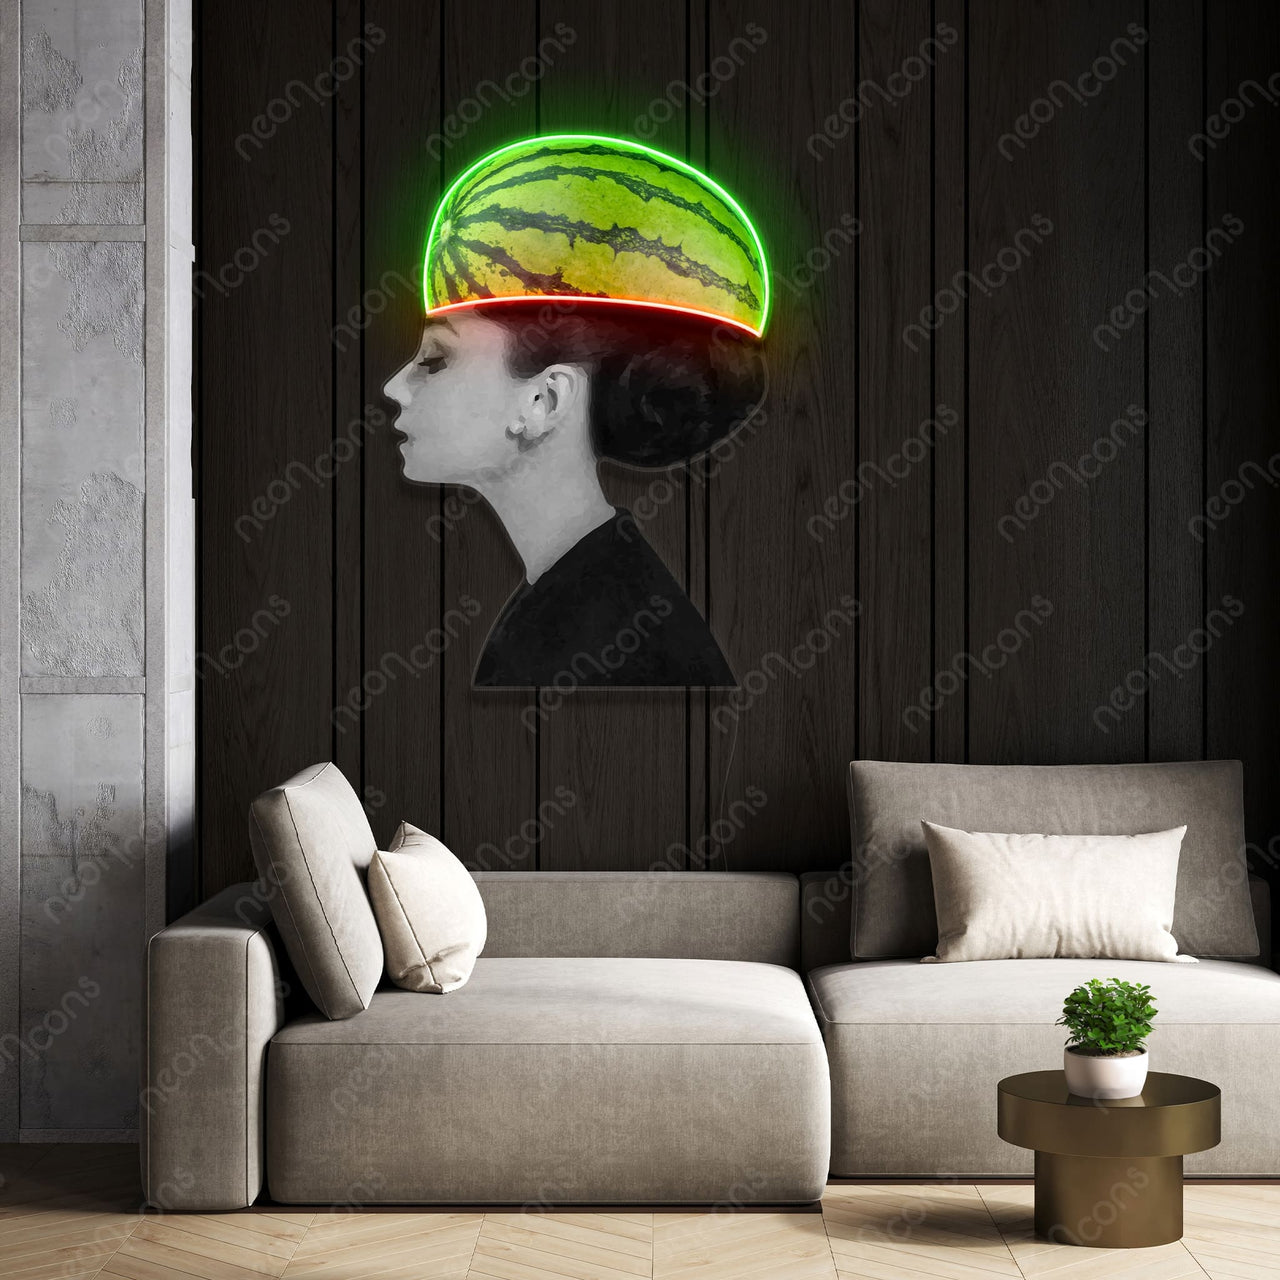 "Funny Hat" Neon x Acrylic Artwork by Neon Icons